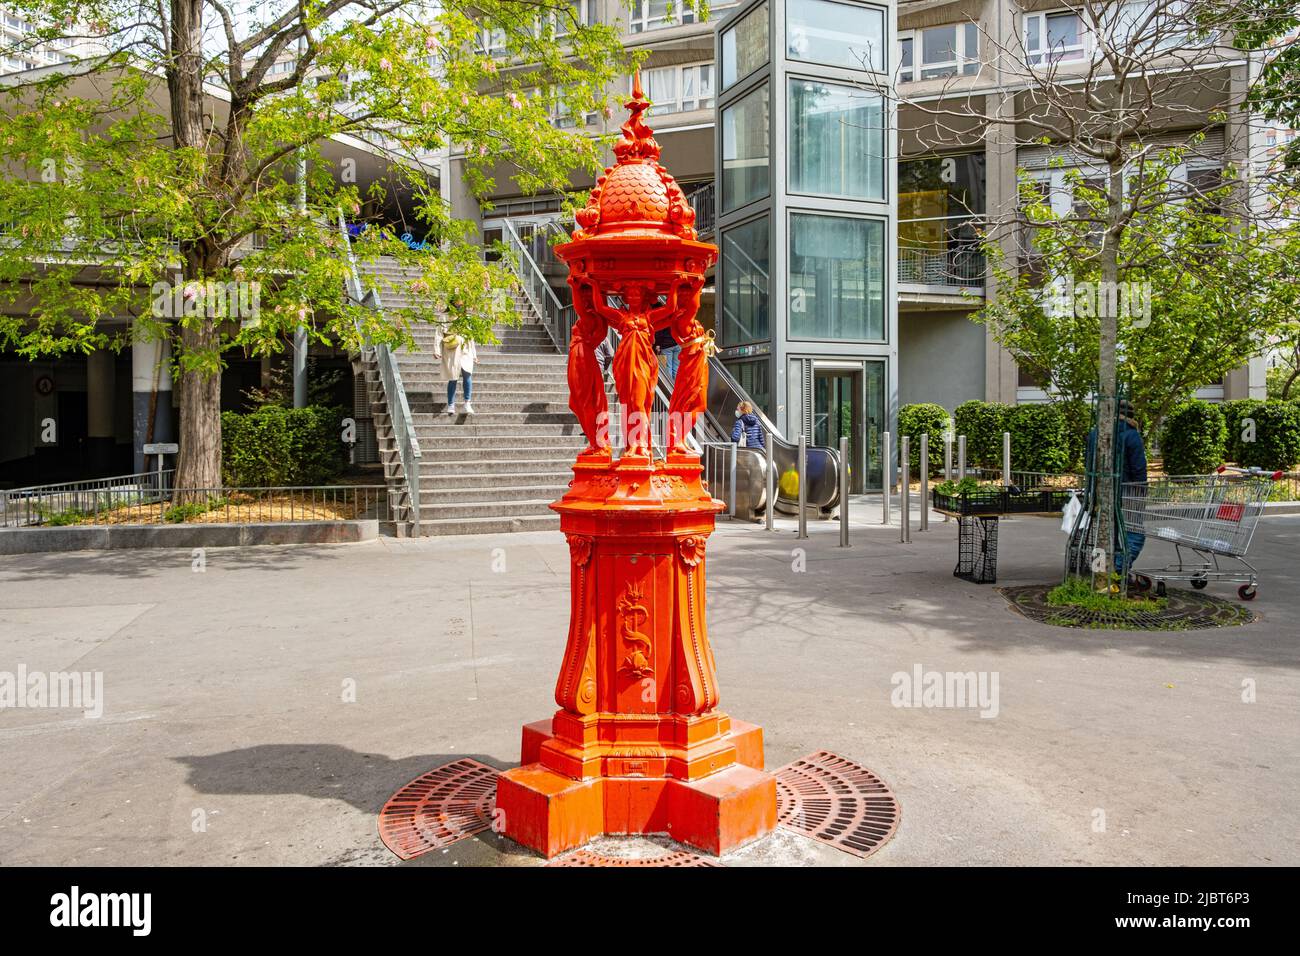 France, Paris, Wallace Fountain painted in red, Chinatown, 66 Avenue d'Ivry Stock Photo